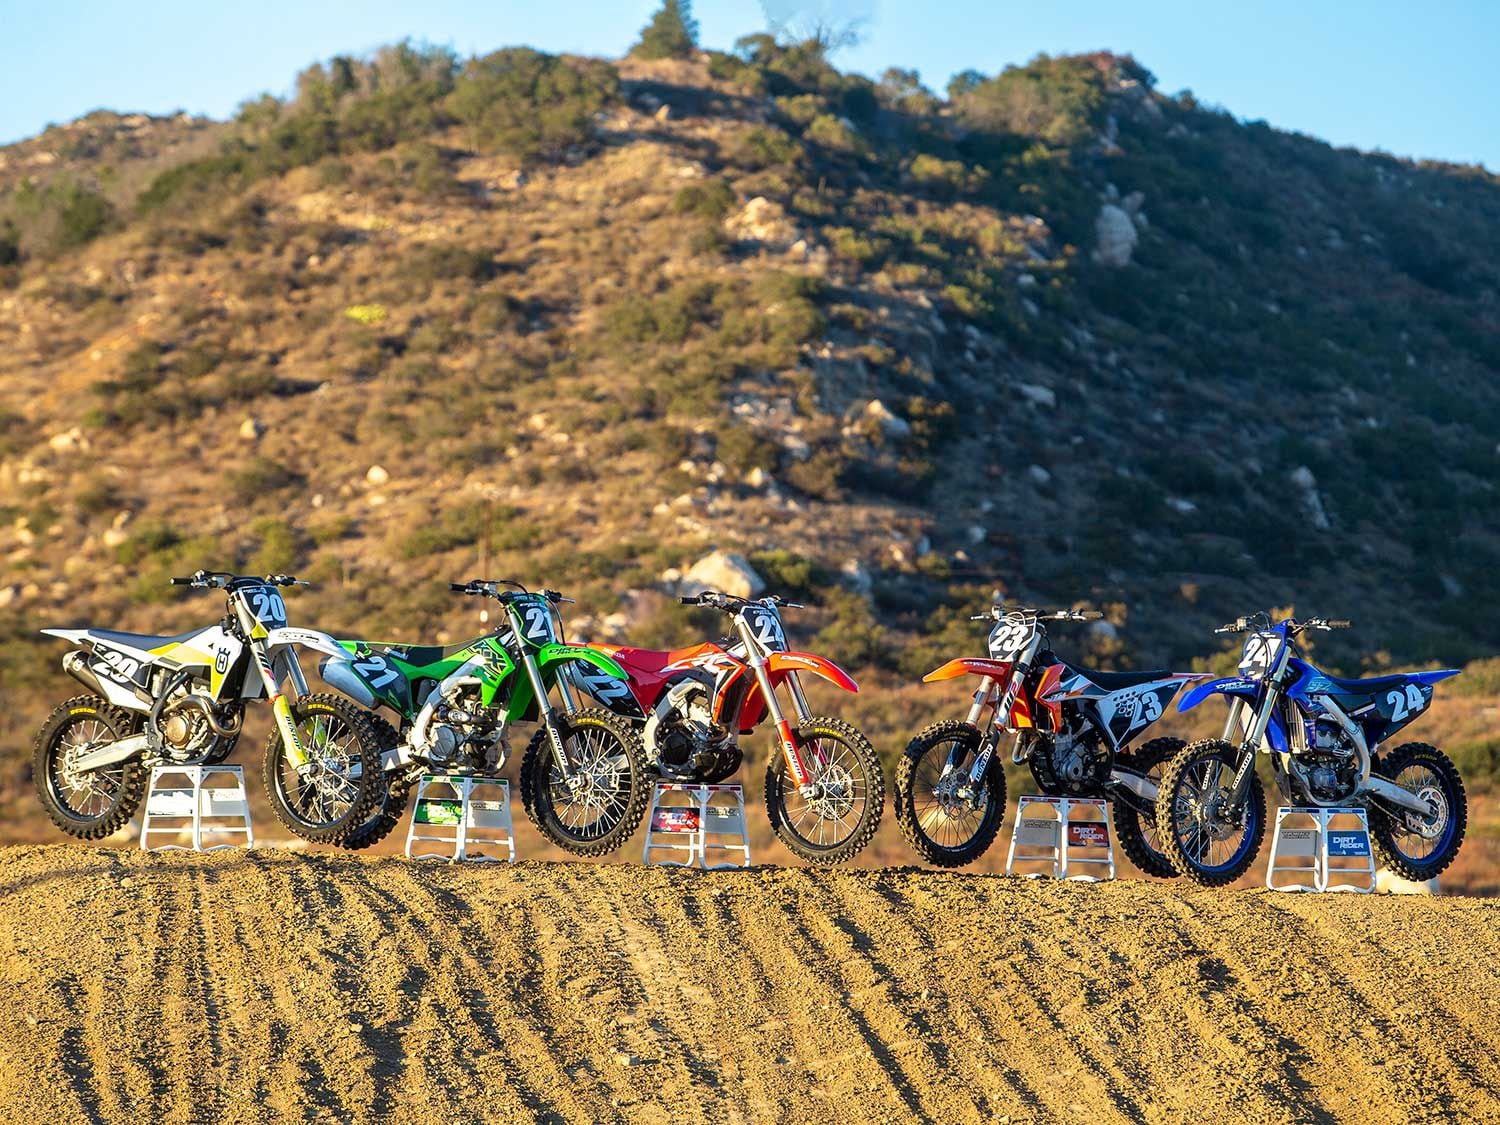 Works Connection stands were used for the static shots of the bikes, and all of the video footage and images were captured at Fox Raceway. The two additional test days took place at Cahuilla Creek MX and Glen Helen Raceway.